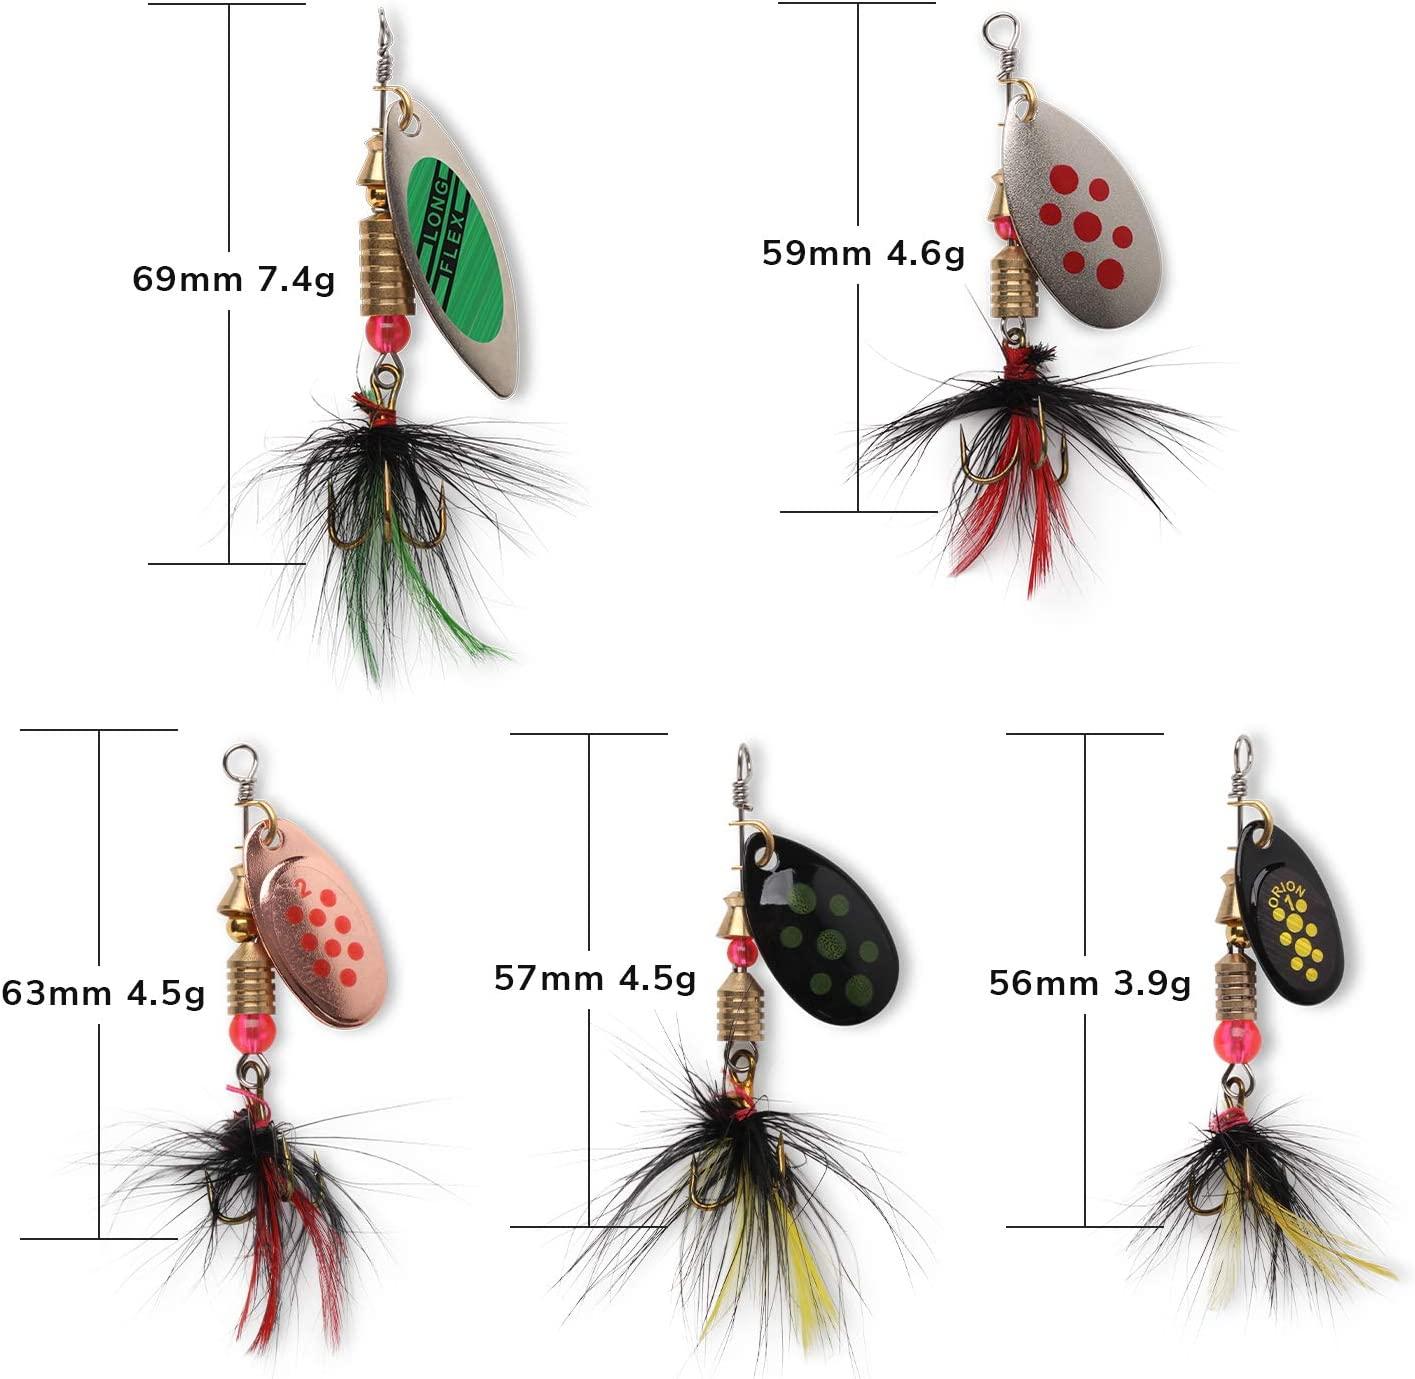  FREE FISHER 6 Pcs Fishing Lures Spinner Baits for Bass Fishing, Trout Salmon Hard Metal Spinnerbaits : Fishing Spinners And Spinnerbaits :  Sports & Outdoors